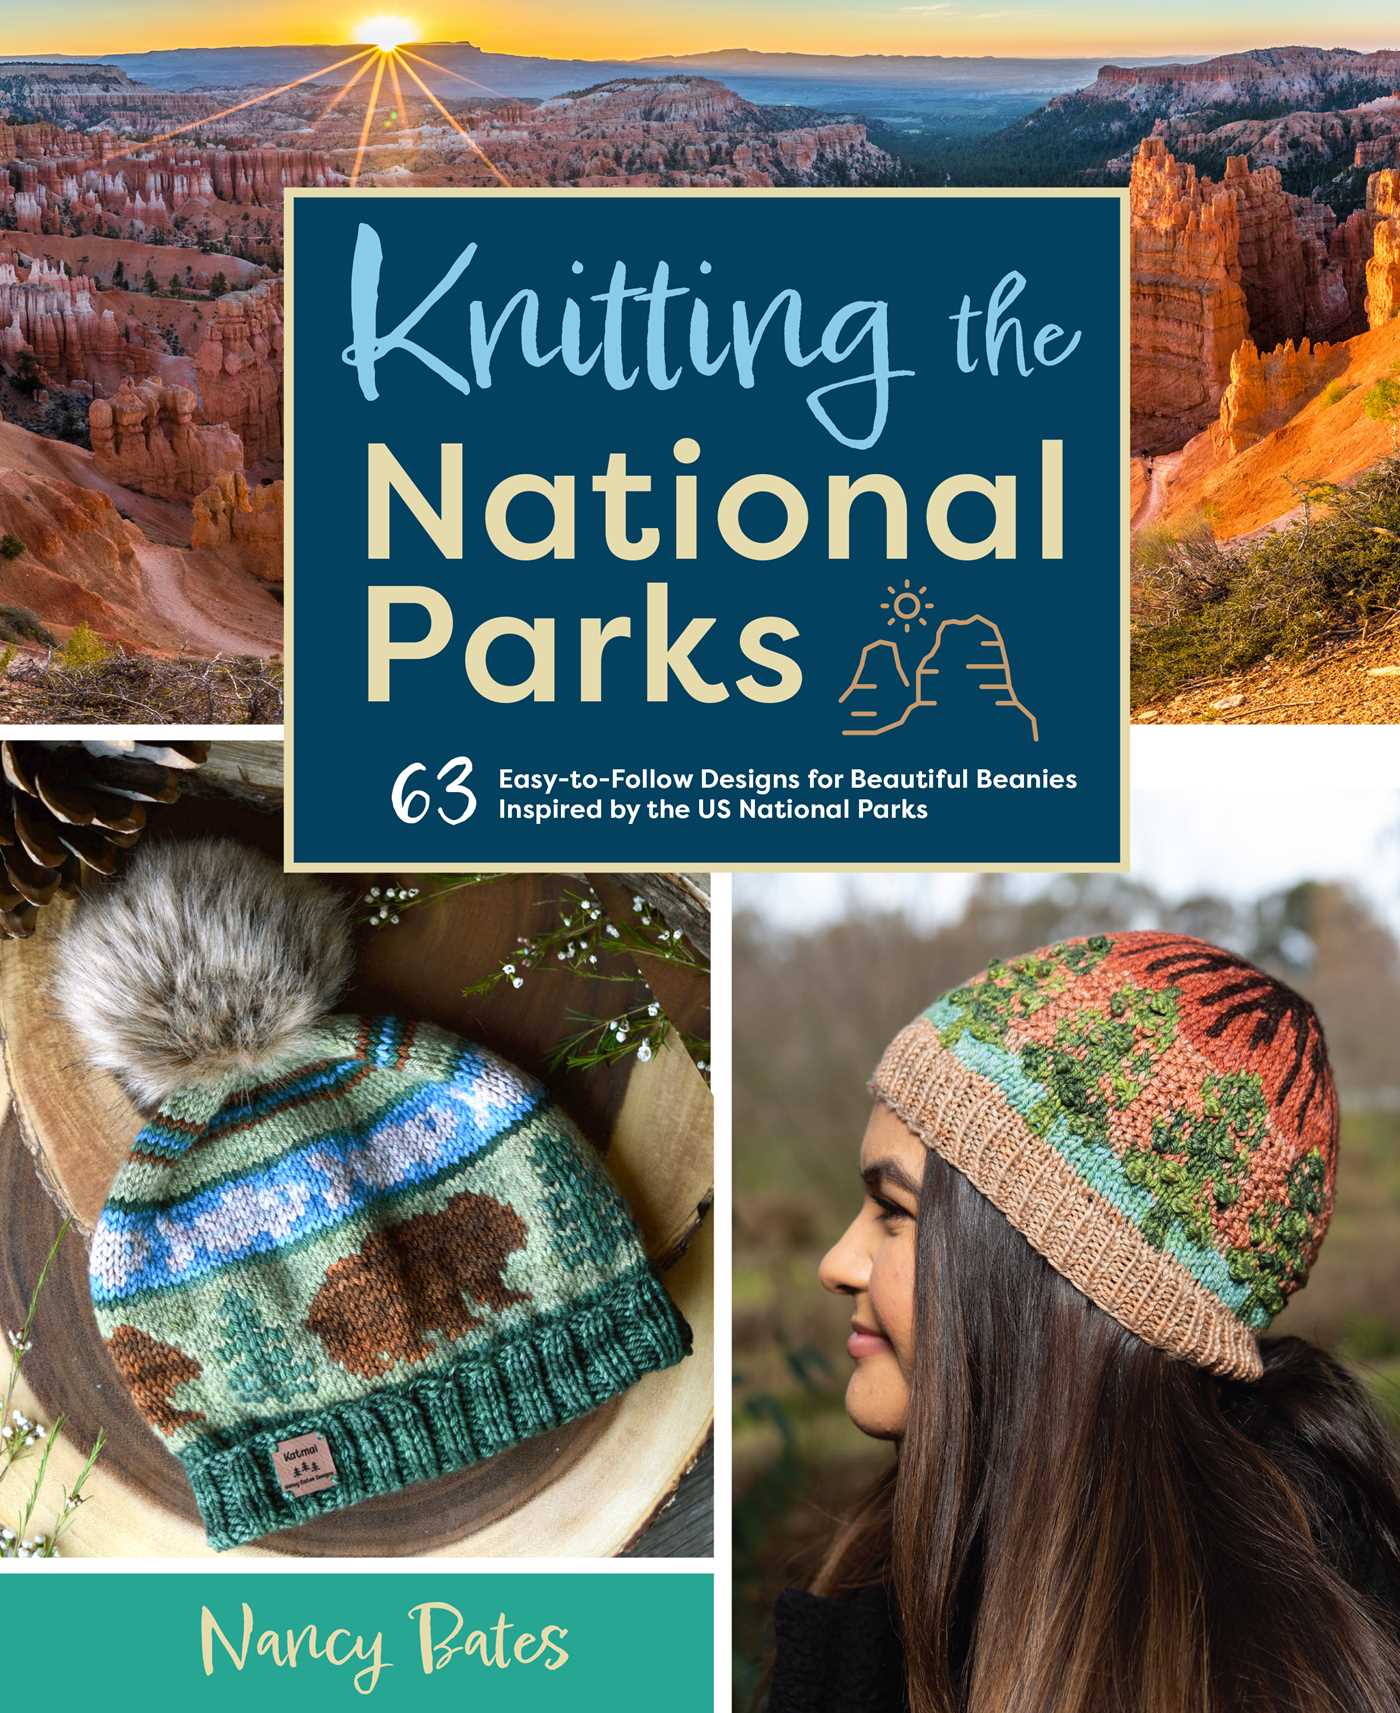 Have You Ordered Your Copy of 'Knitting The National Parks' By Nancy Bates?